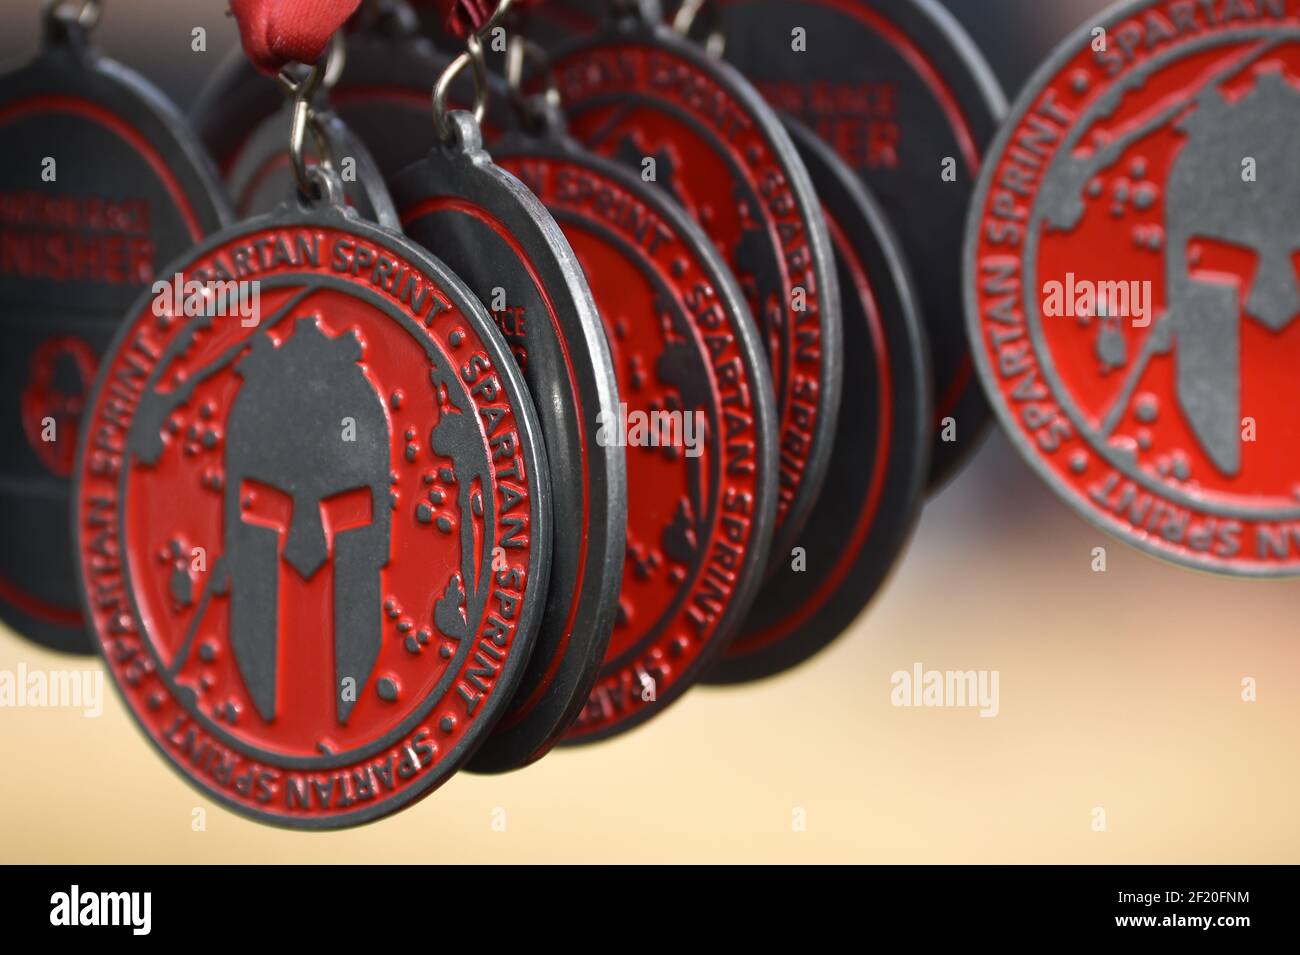 Medals of Spartan Race during the Reebok Spartan Race in Jablines, September 19, 2015. The